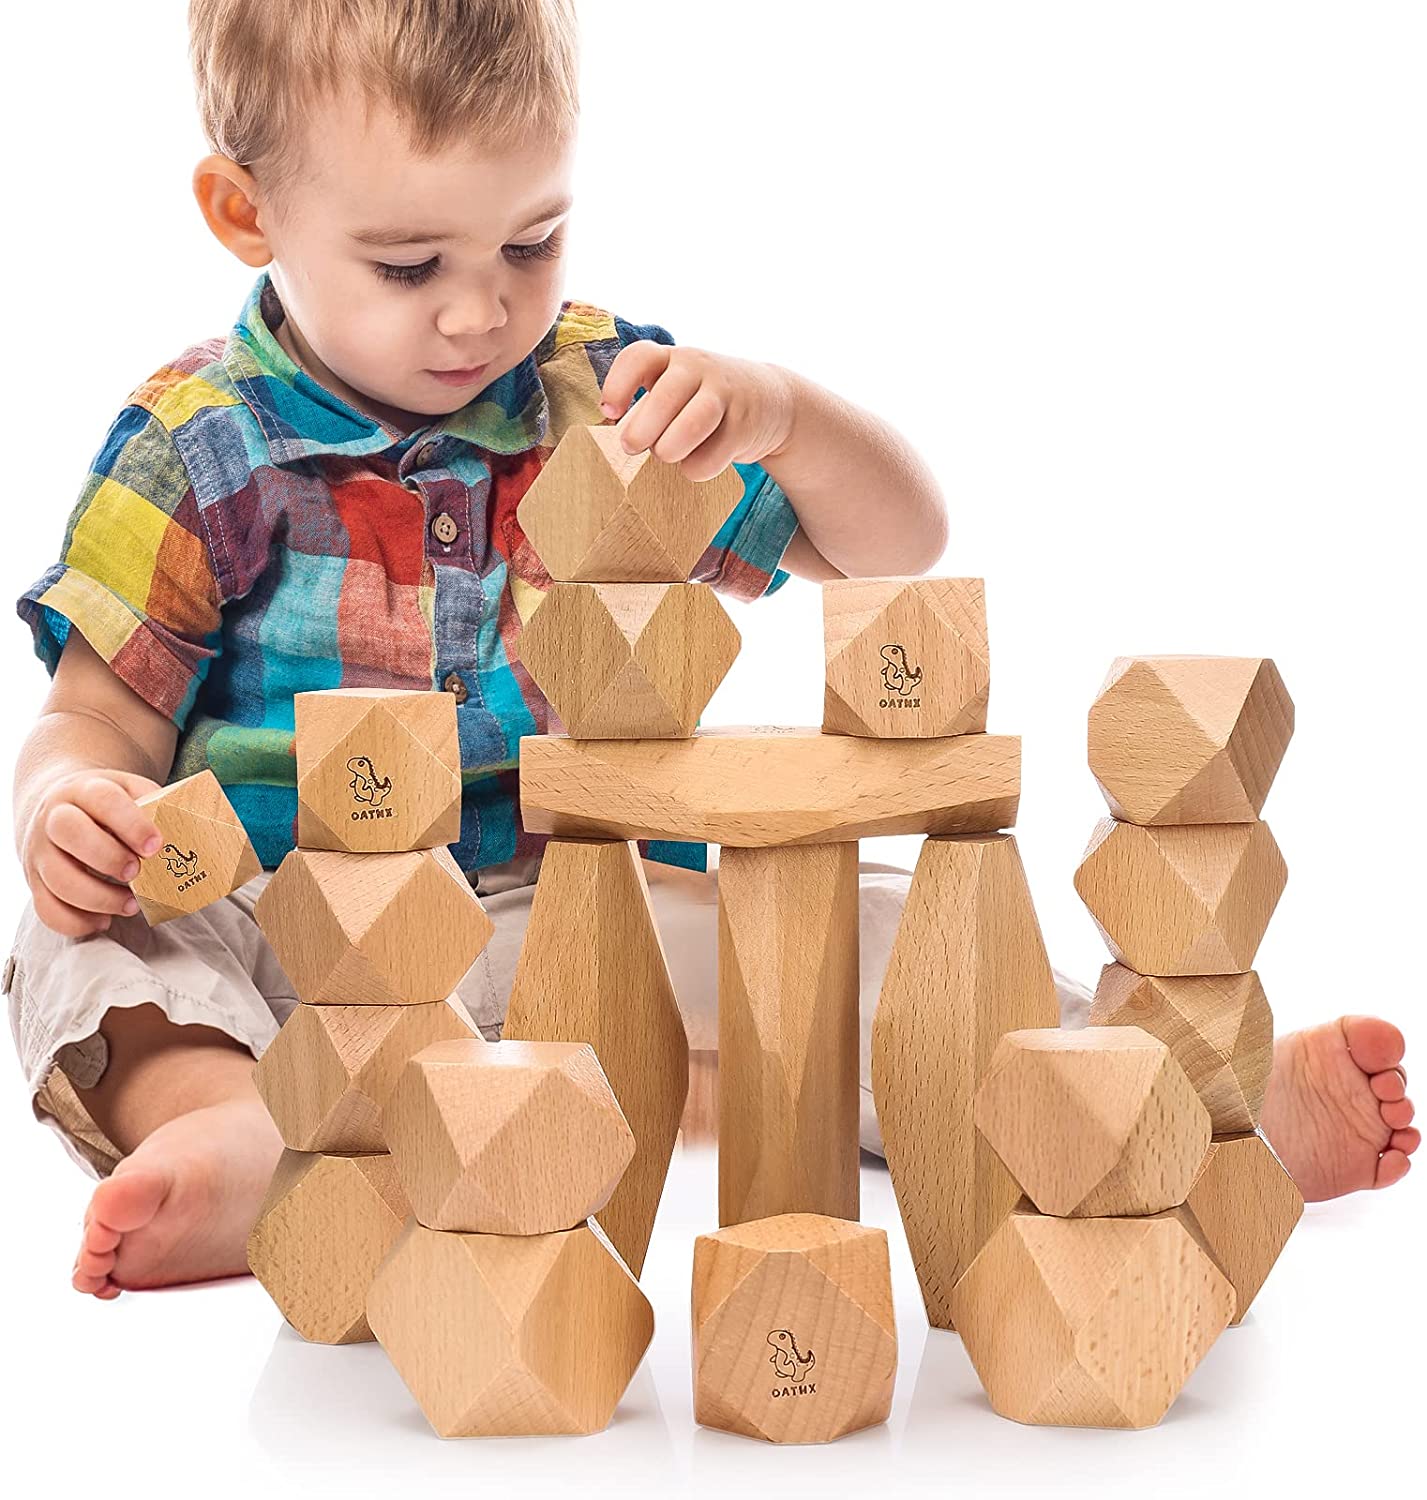 Wood Balancing Stones Rock Blocks Building Creative Toy Equilibrium Stacking Game Rainbow Color for Kids Babies Girls Boys Wooden Stacking Game 